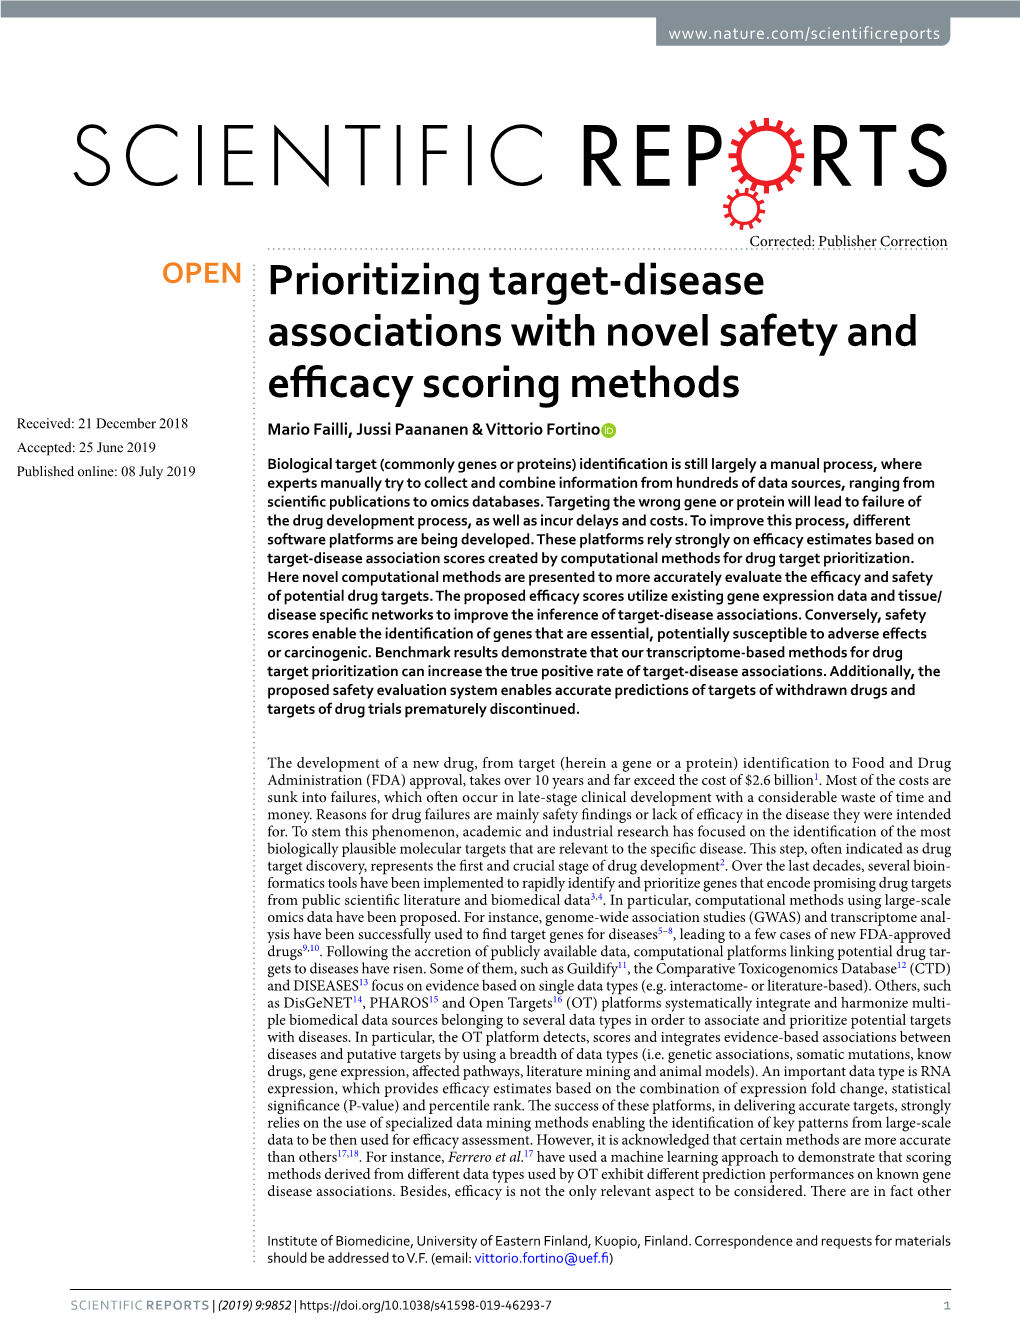 Prioritizing Target-Disease Associations with Novel Safety And